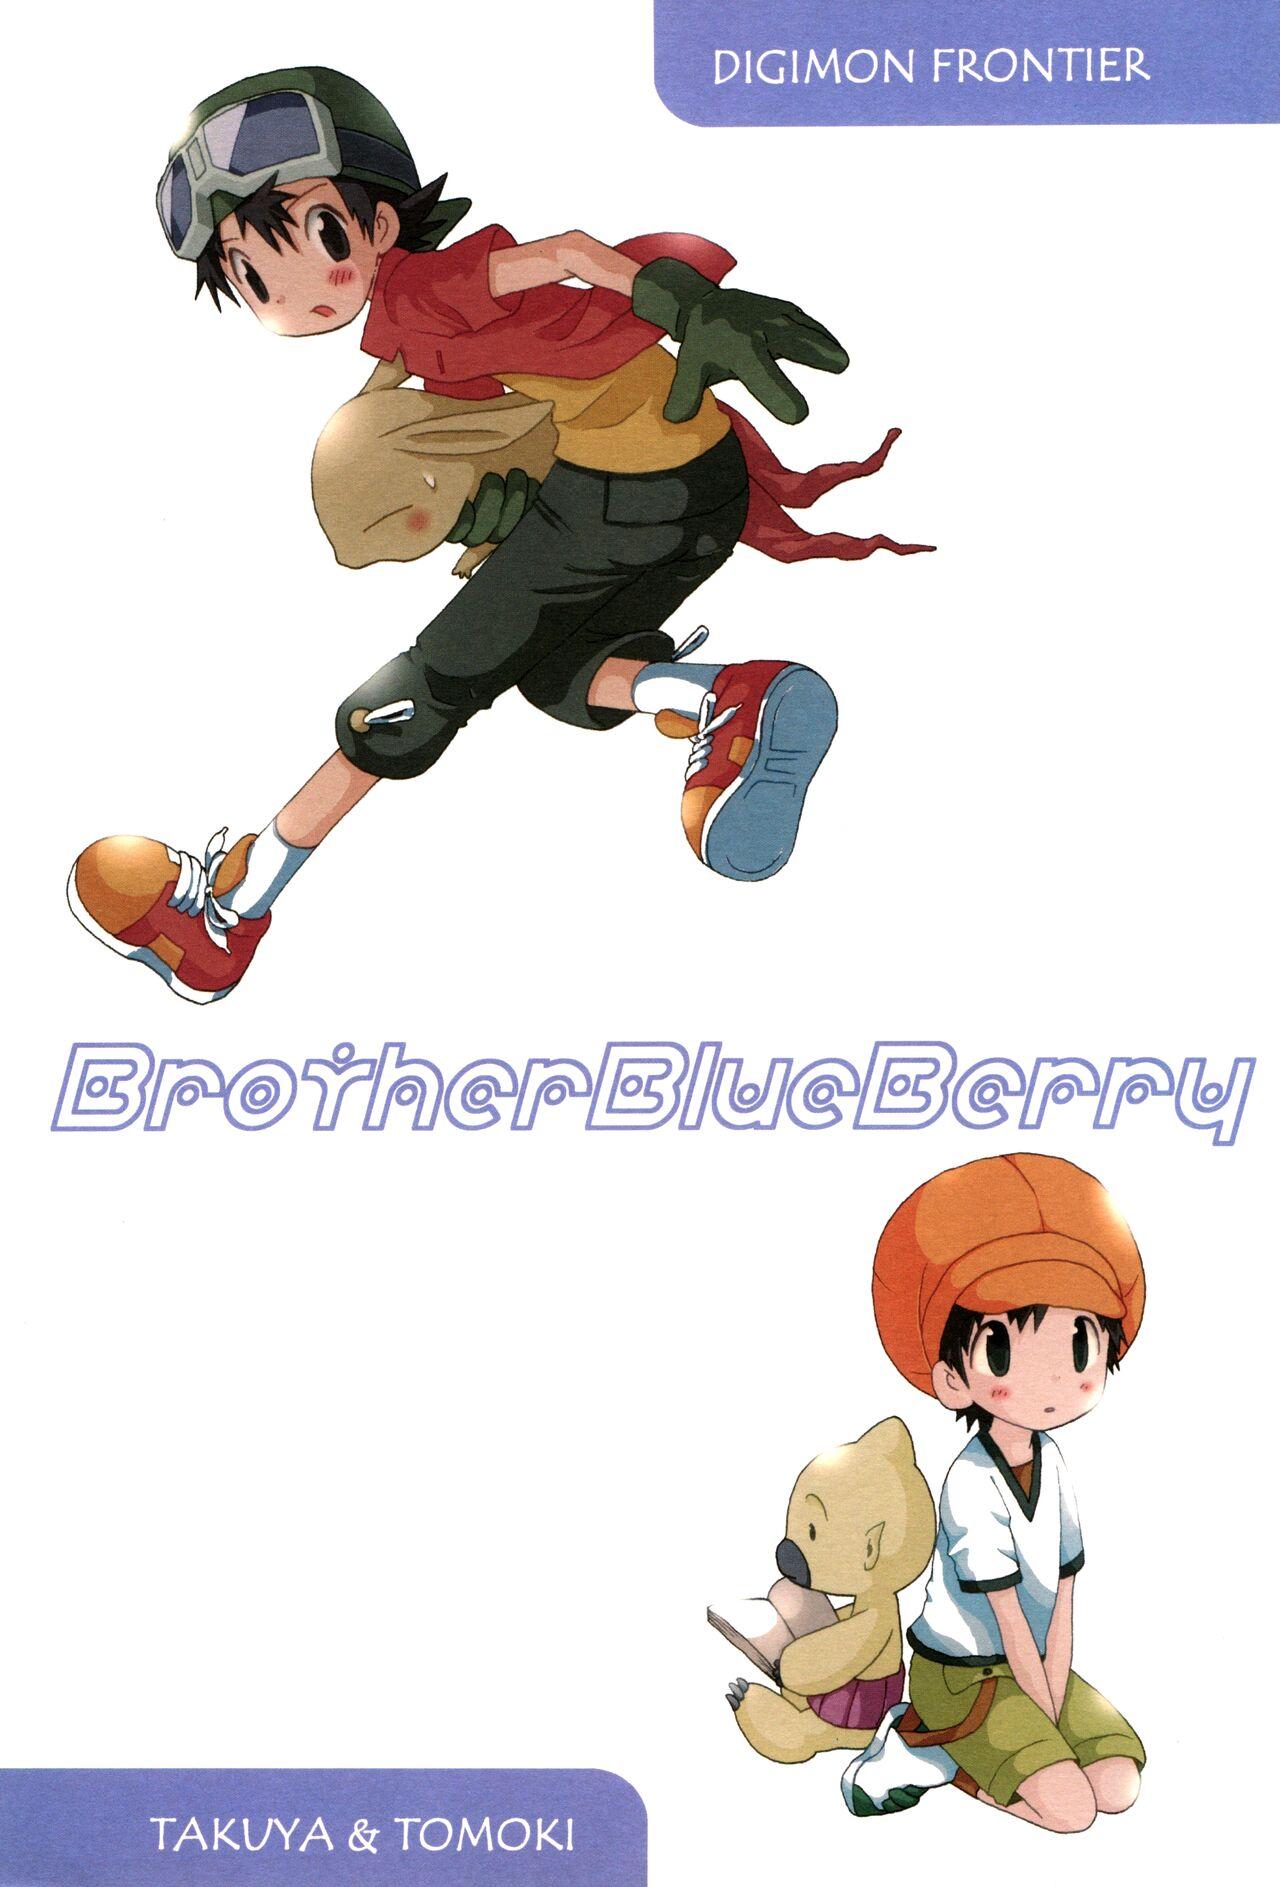 Lesbos Brother Blue Berry - Digimon Digimon frontier Blowjob - Page 1